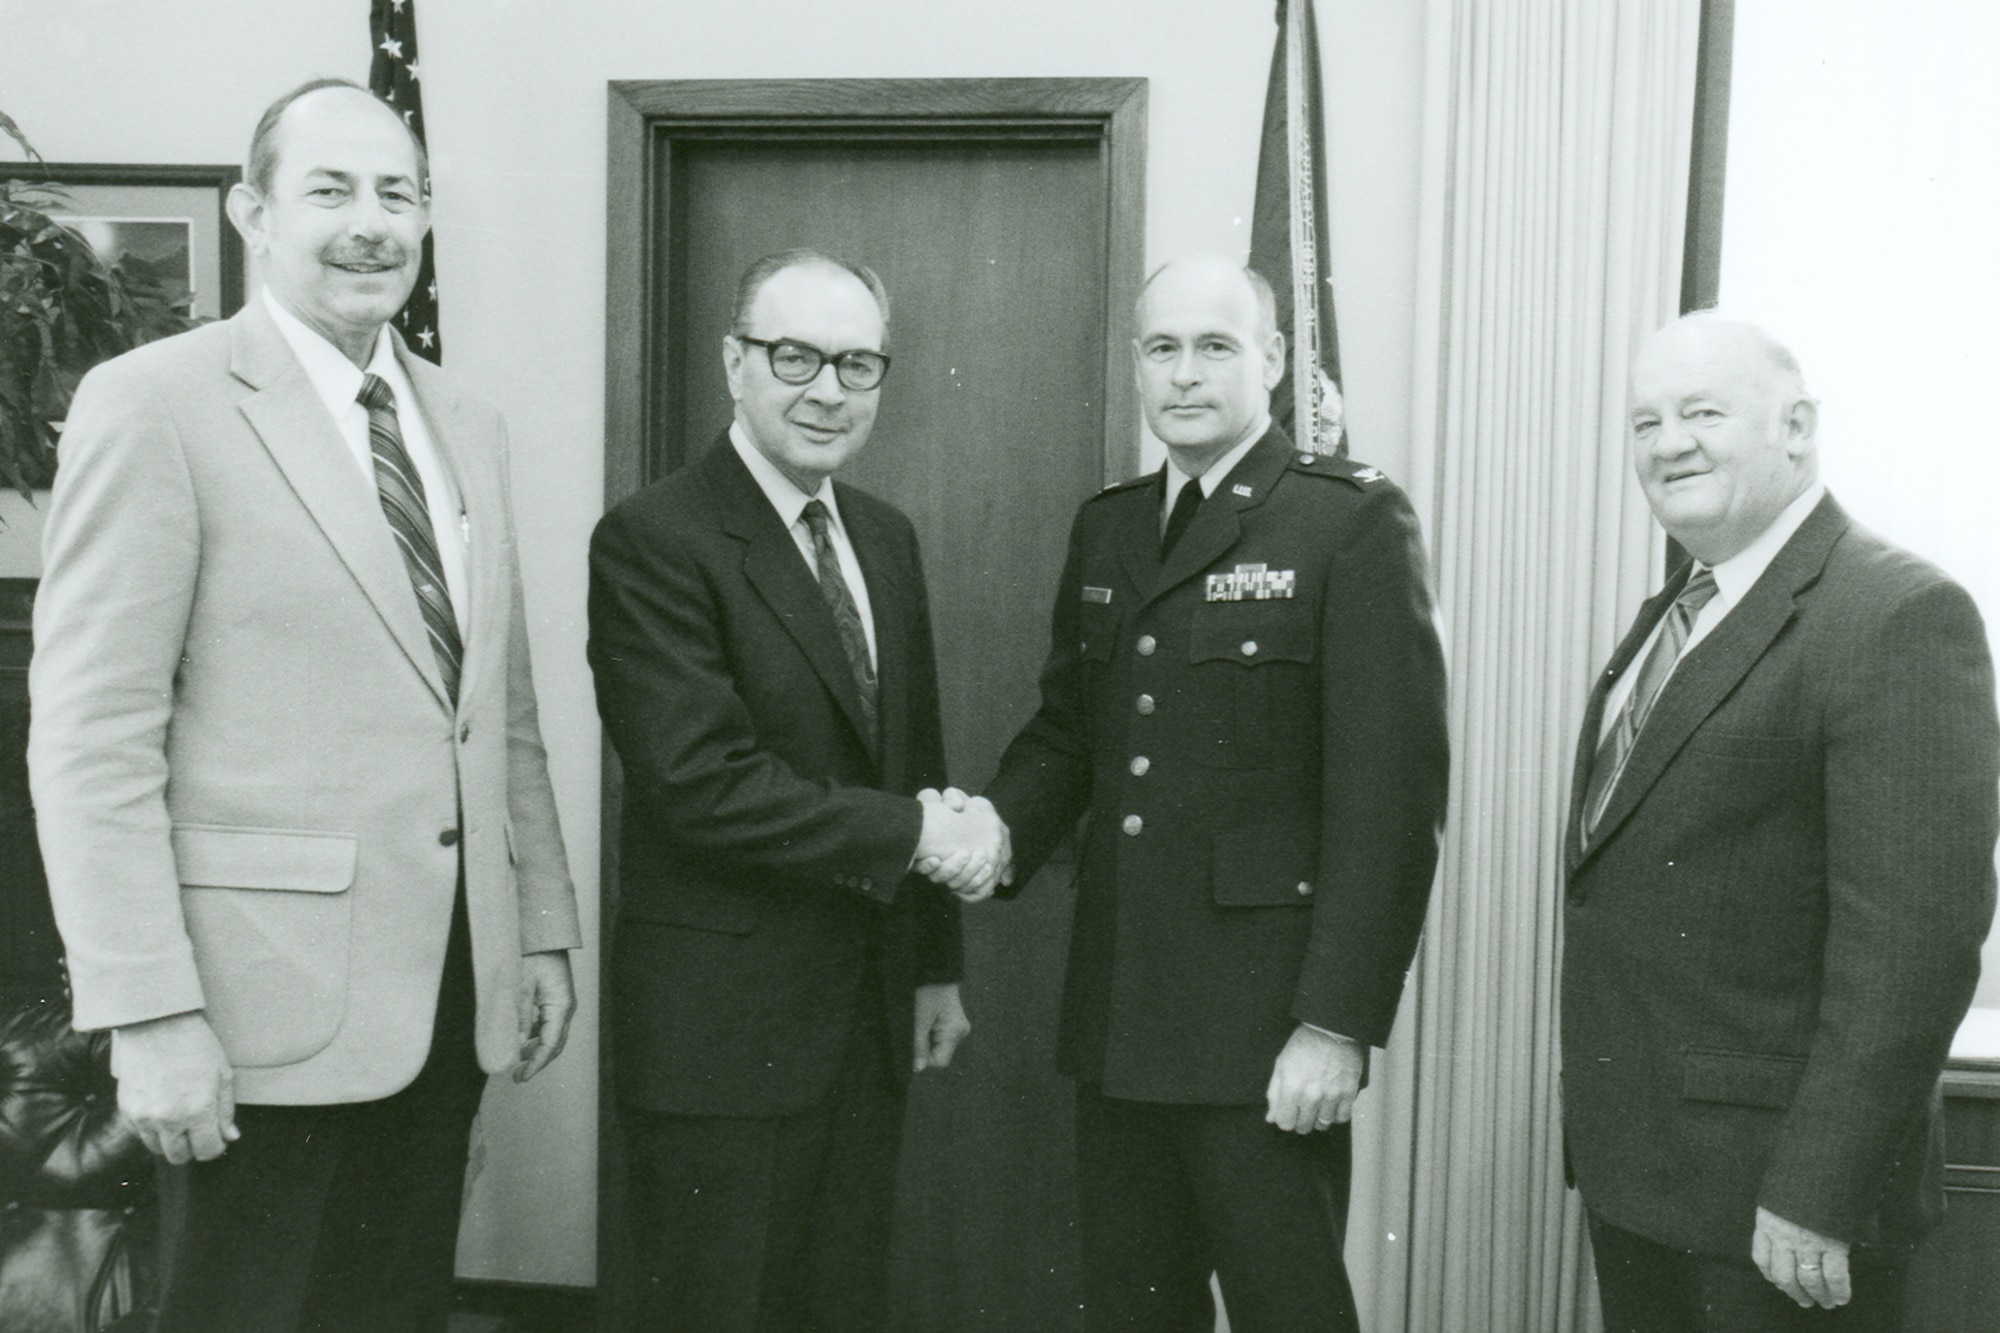 Richard Austin, right, then-deputy director of Arnold Engineering Development Center Propulsion Test, is present for the early 1990s handshake between then-AEDC Commander Col. Richard Roellig, second from right, and Ray Lemaire, manager of Engineering Operations in Commercial Engine Business for Pratt & Whitney. Roellig and Lemaire shook to acknowledge an agreement for AEDC to test Pratt & Whitney’s new PW4084 commercial aircraft engines. Also pictured is Don Craig with Pratt & Whitney. (U.S. Air Force photo)